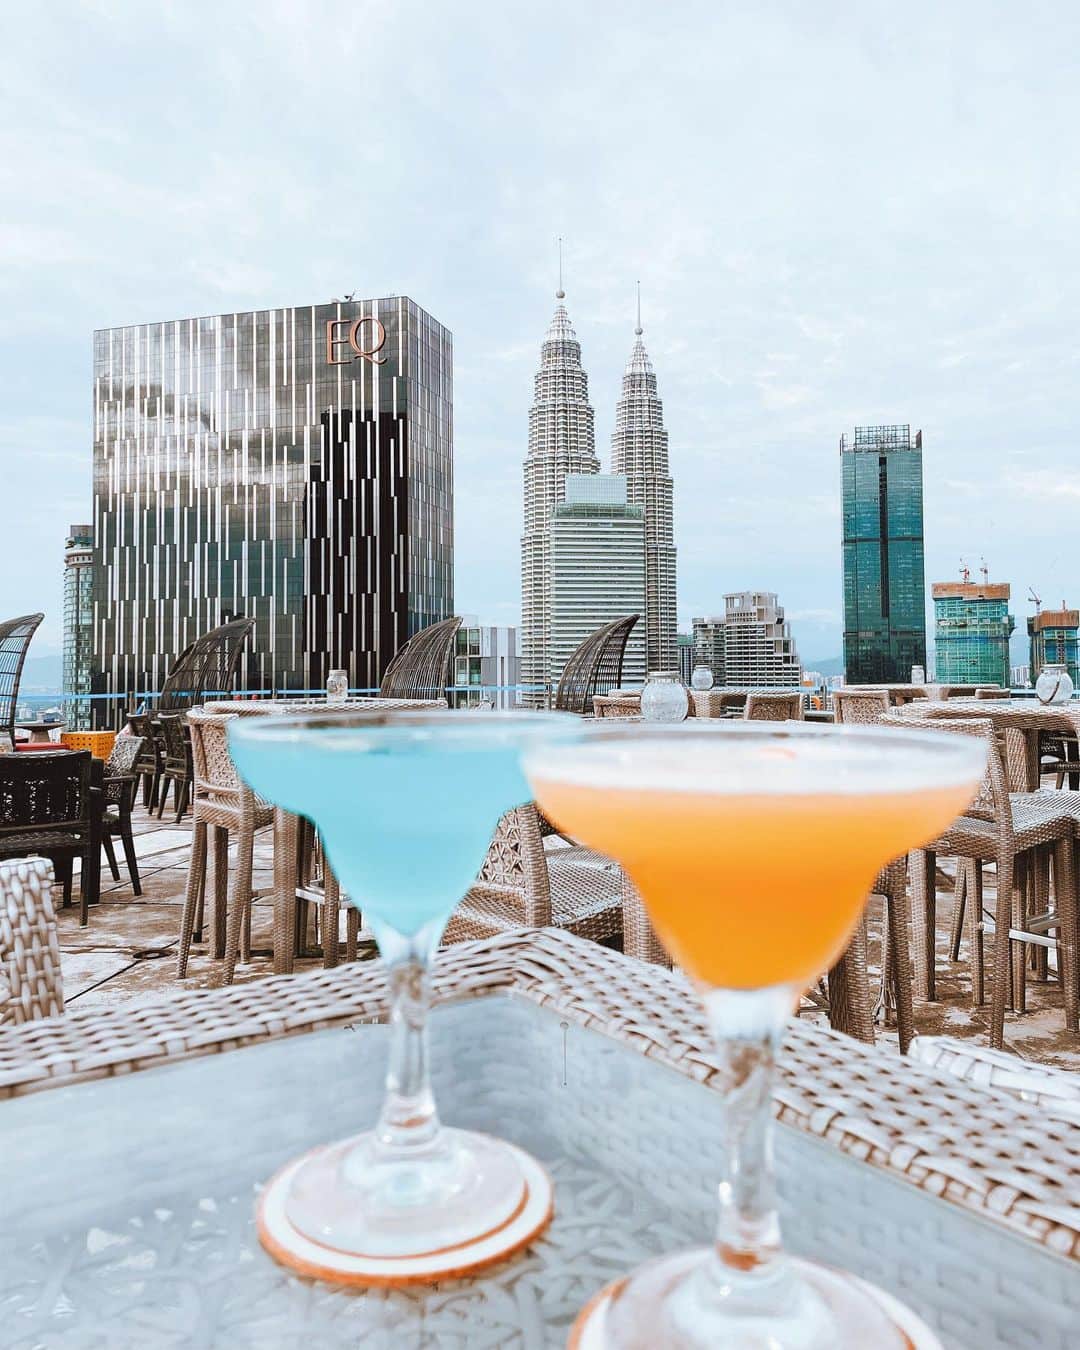 Things to do in KL - helipad bar